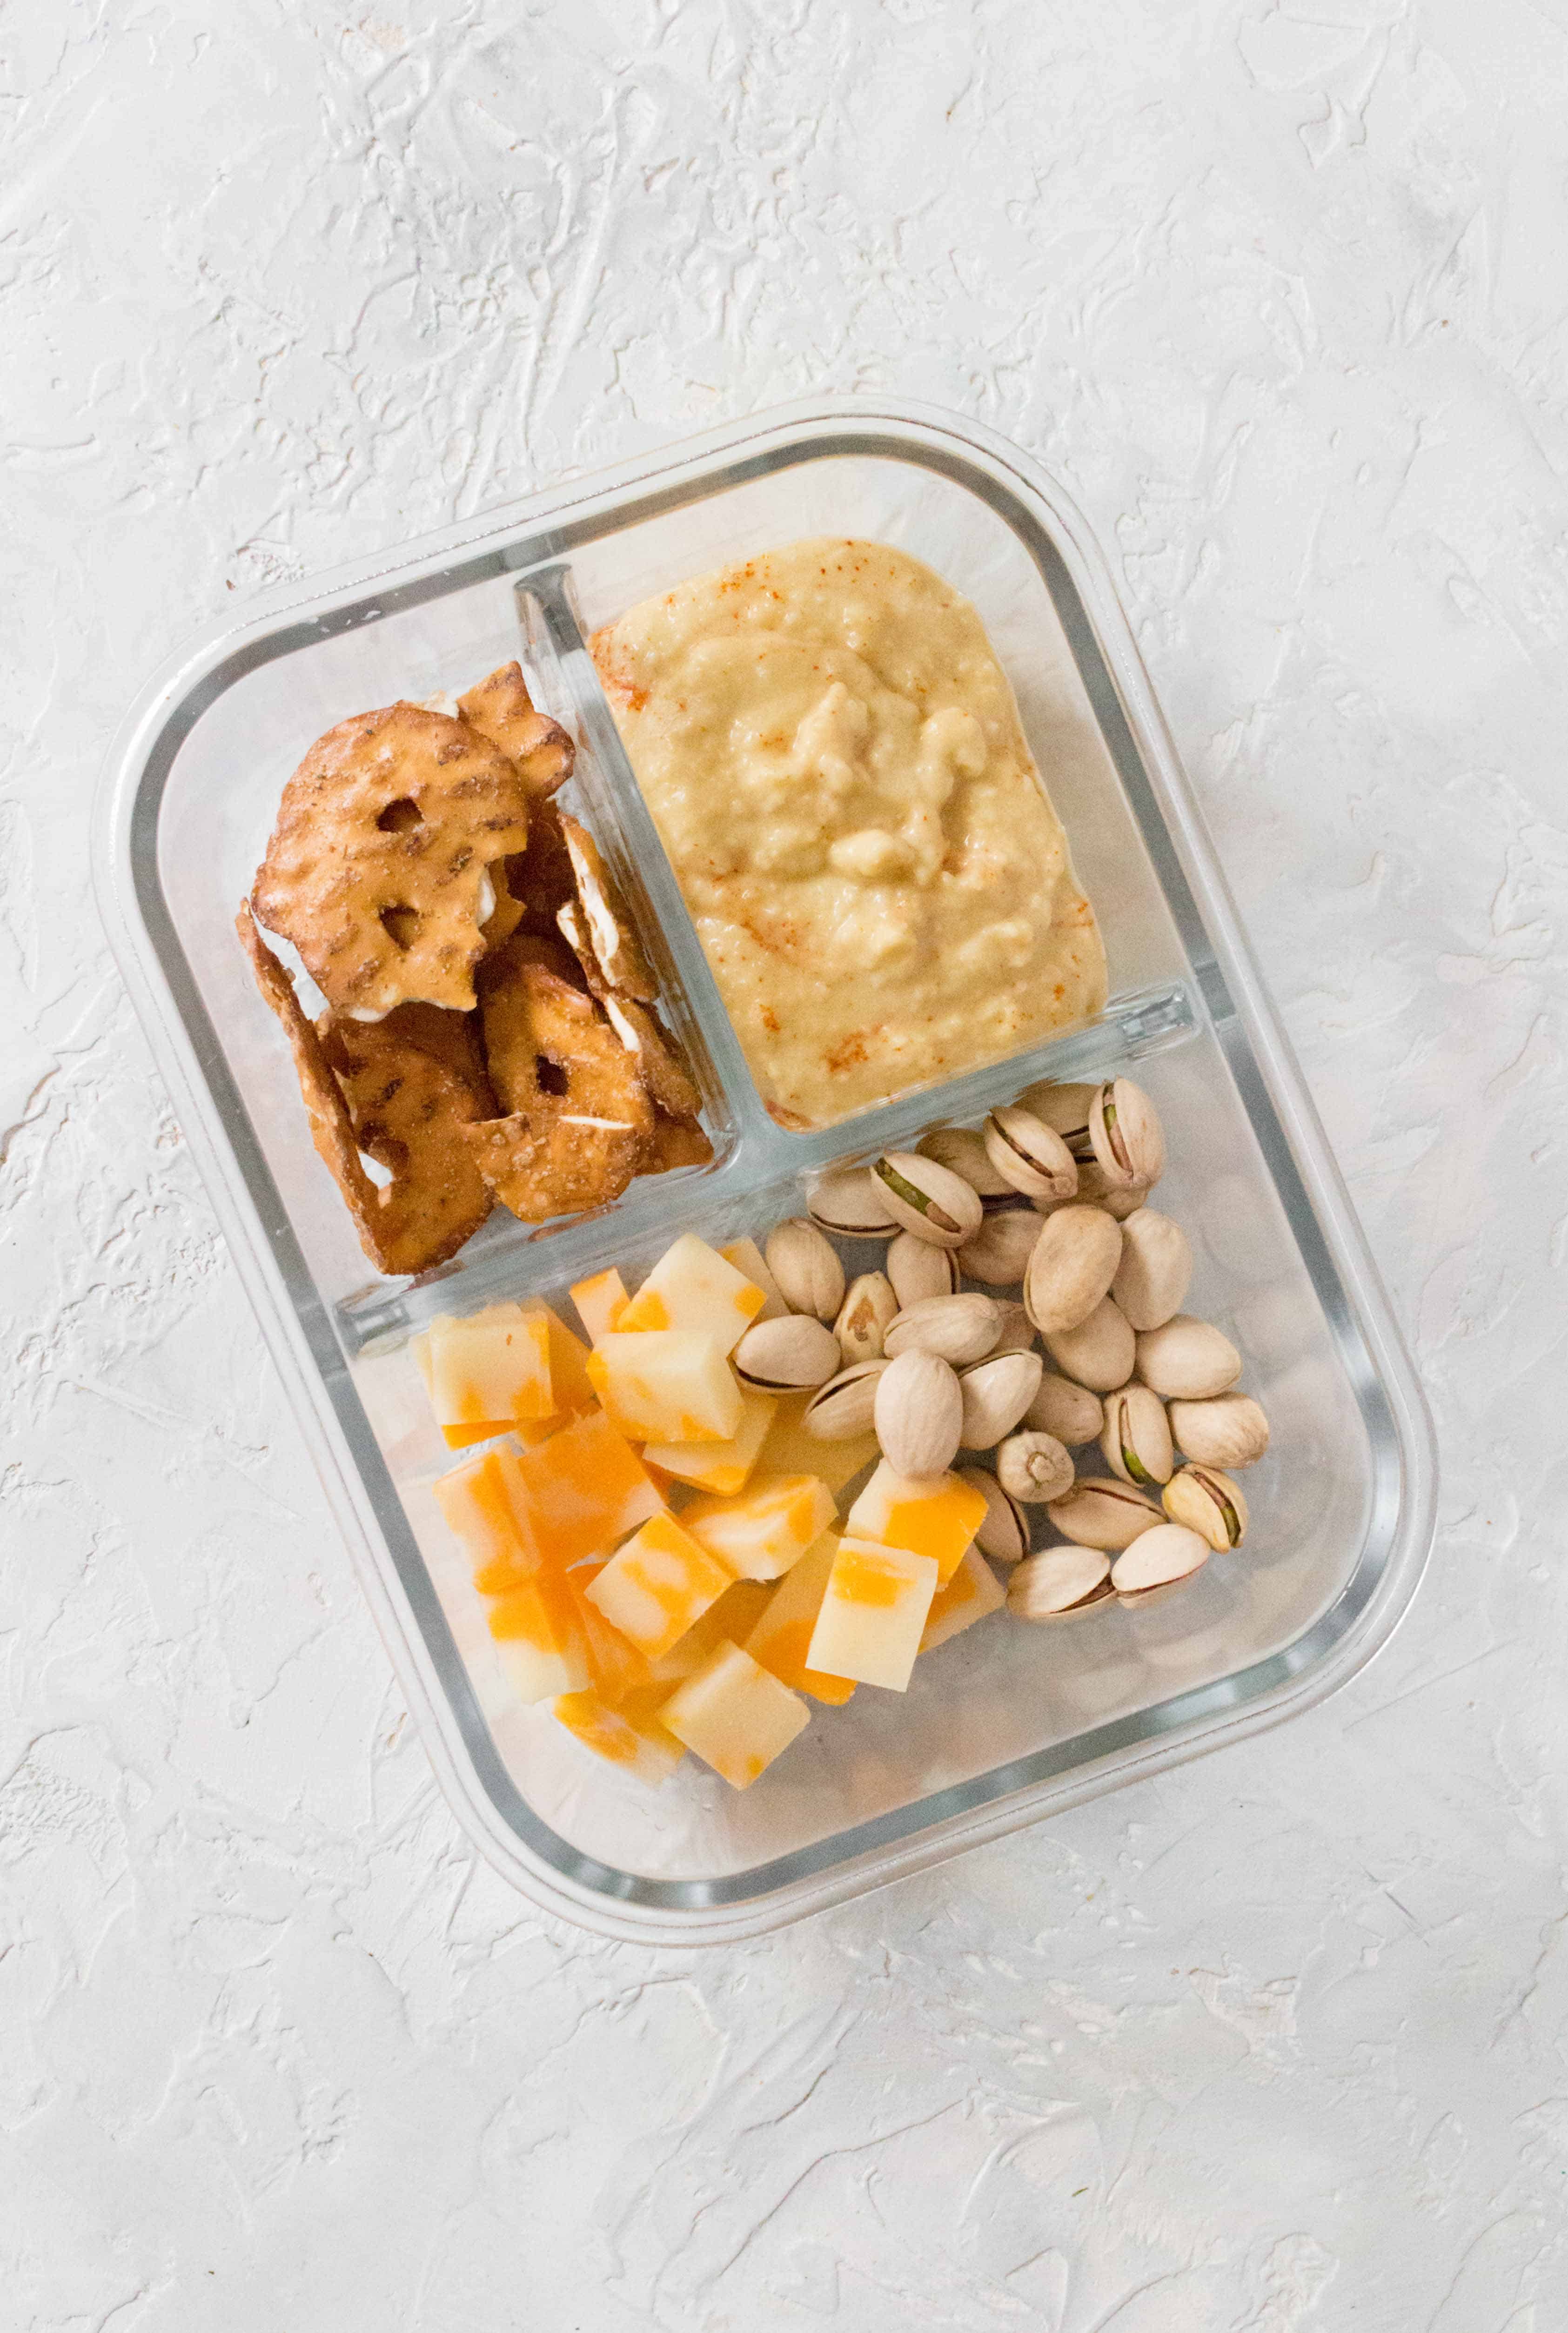 How to make hummus from dried chickpeas without tahini